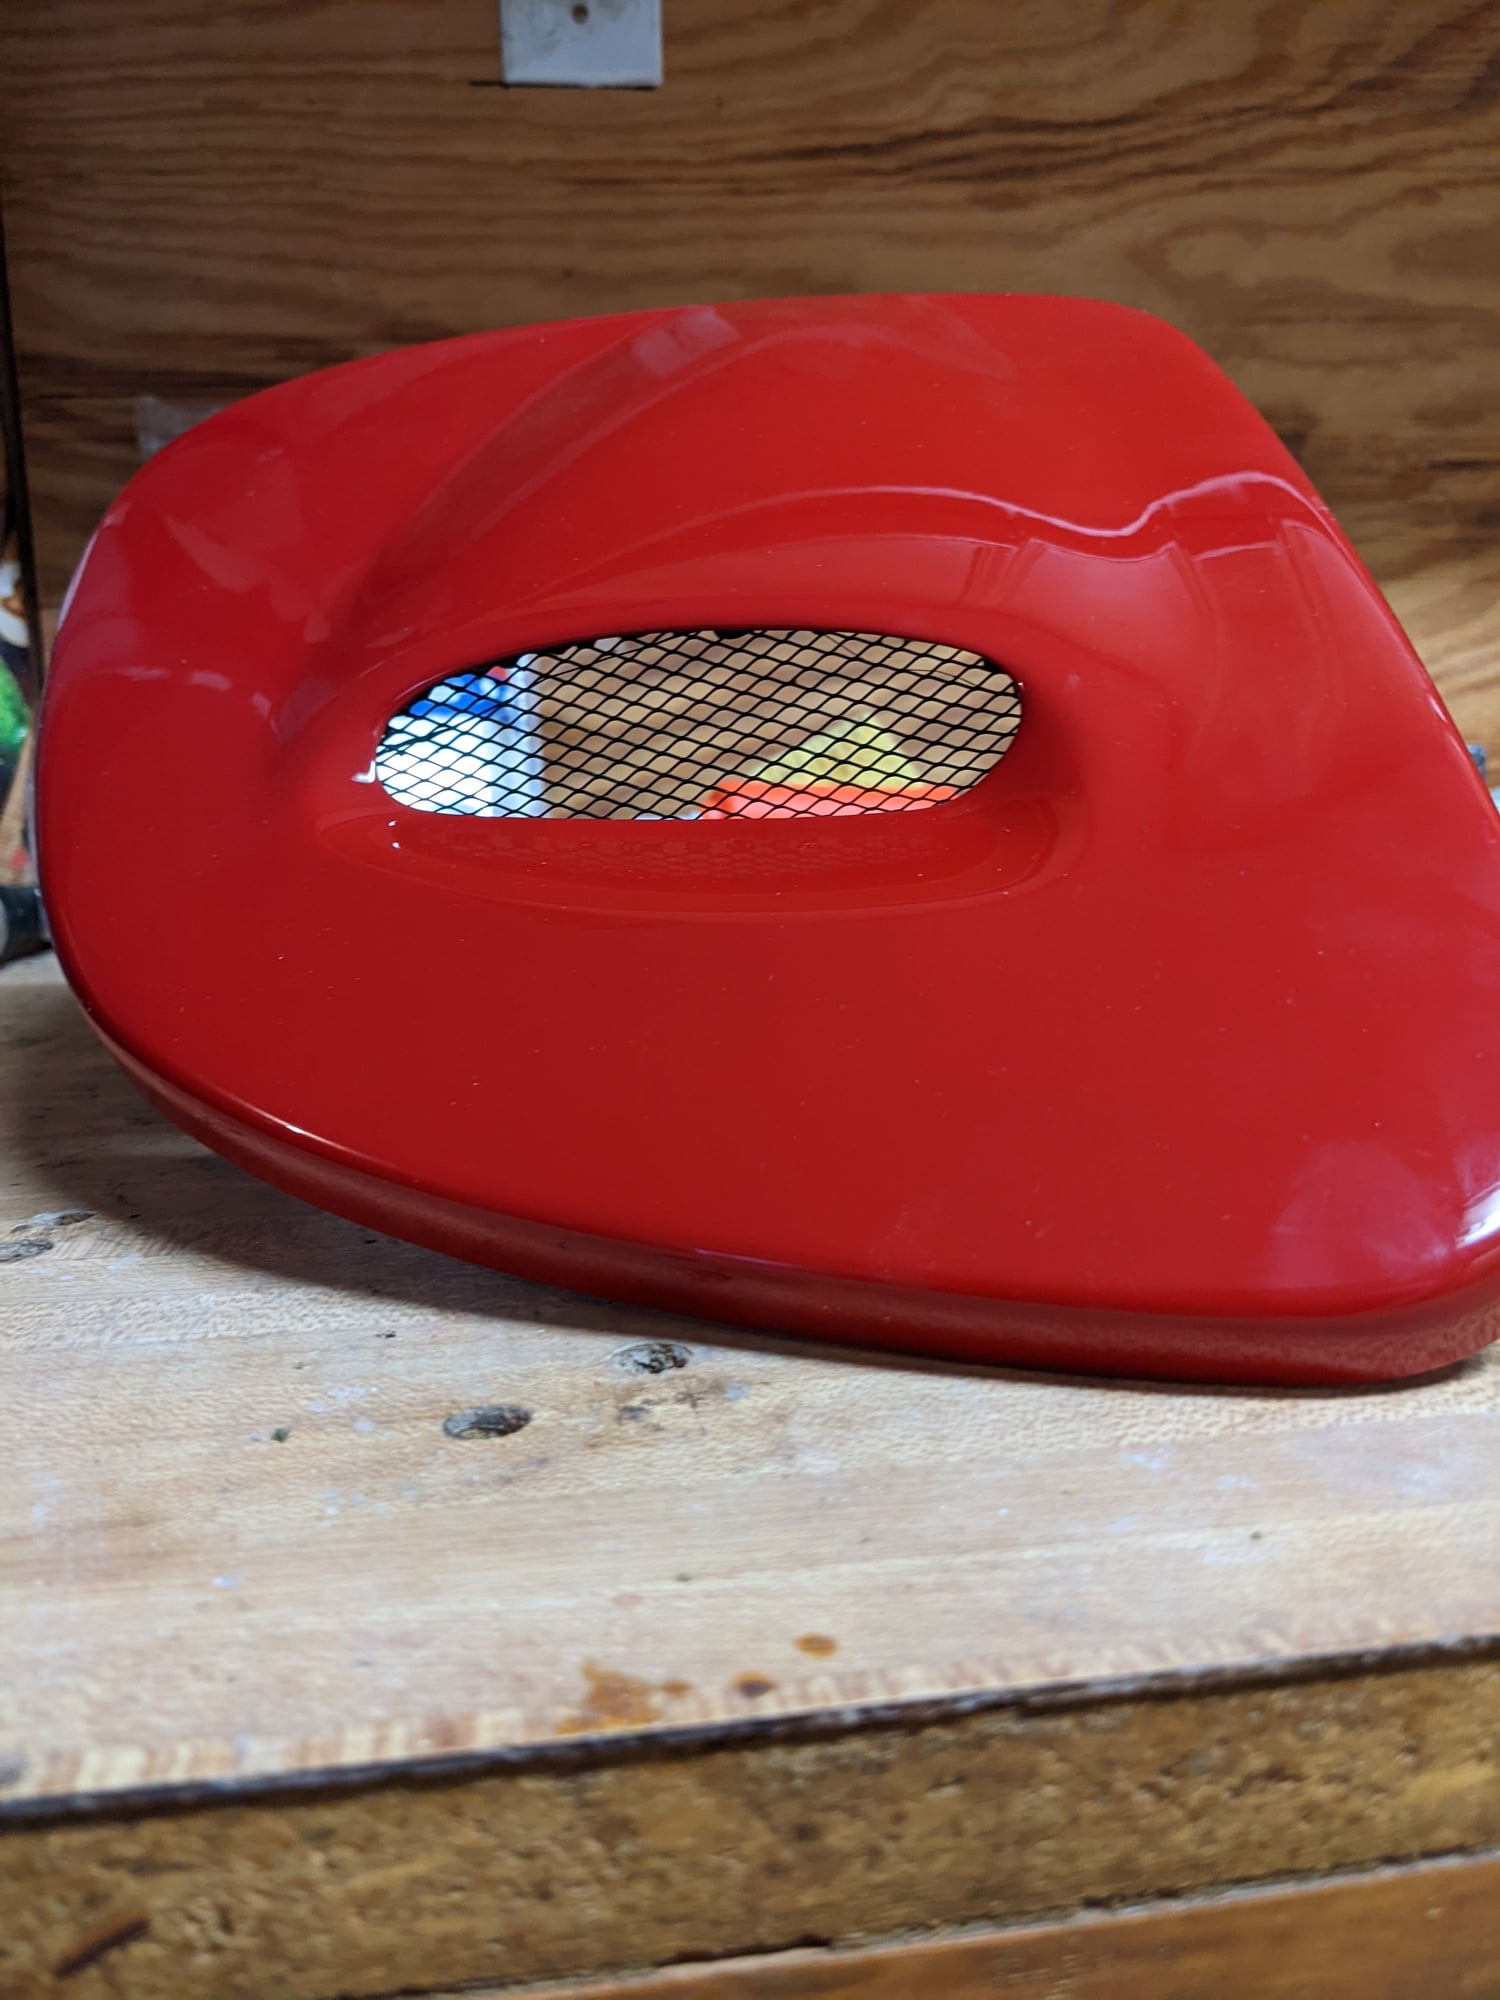 Exterior Body Parts - Vented Passenger Headlight Cover - Red - Used - 1993 to 1995 Mazda RX-7 - Austin, TX 78759, United States